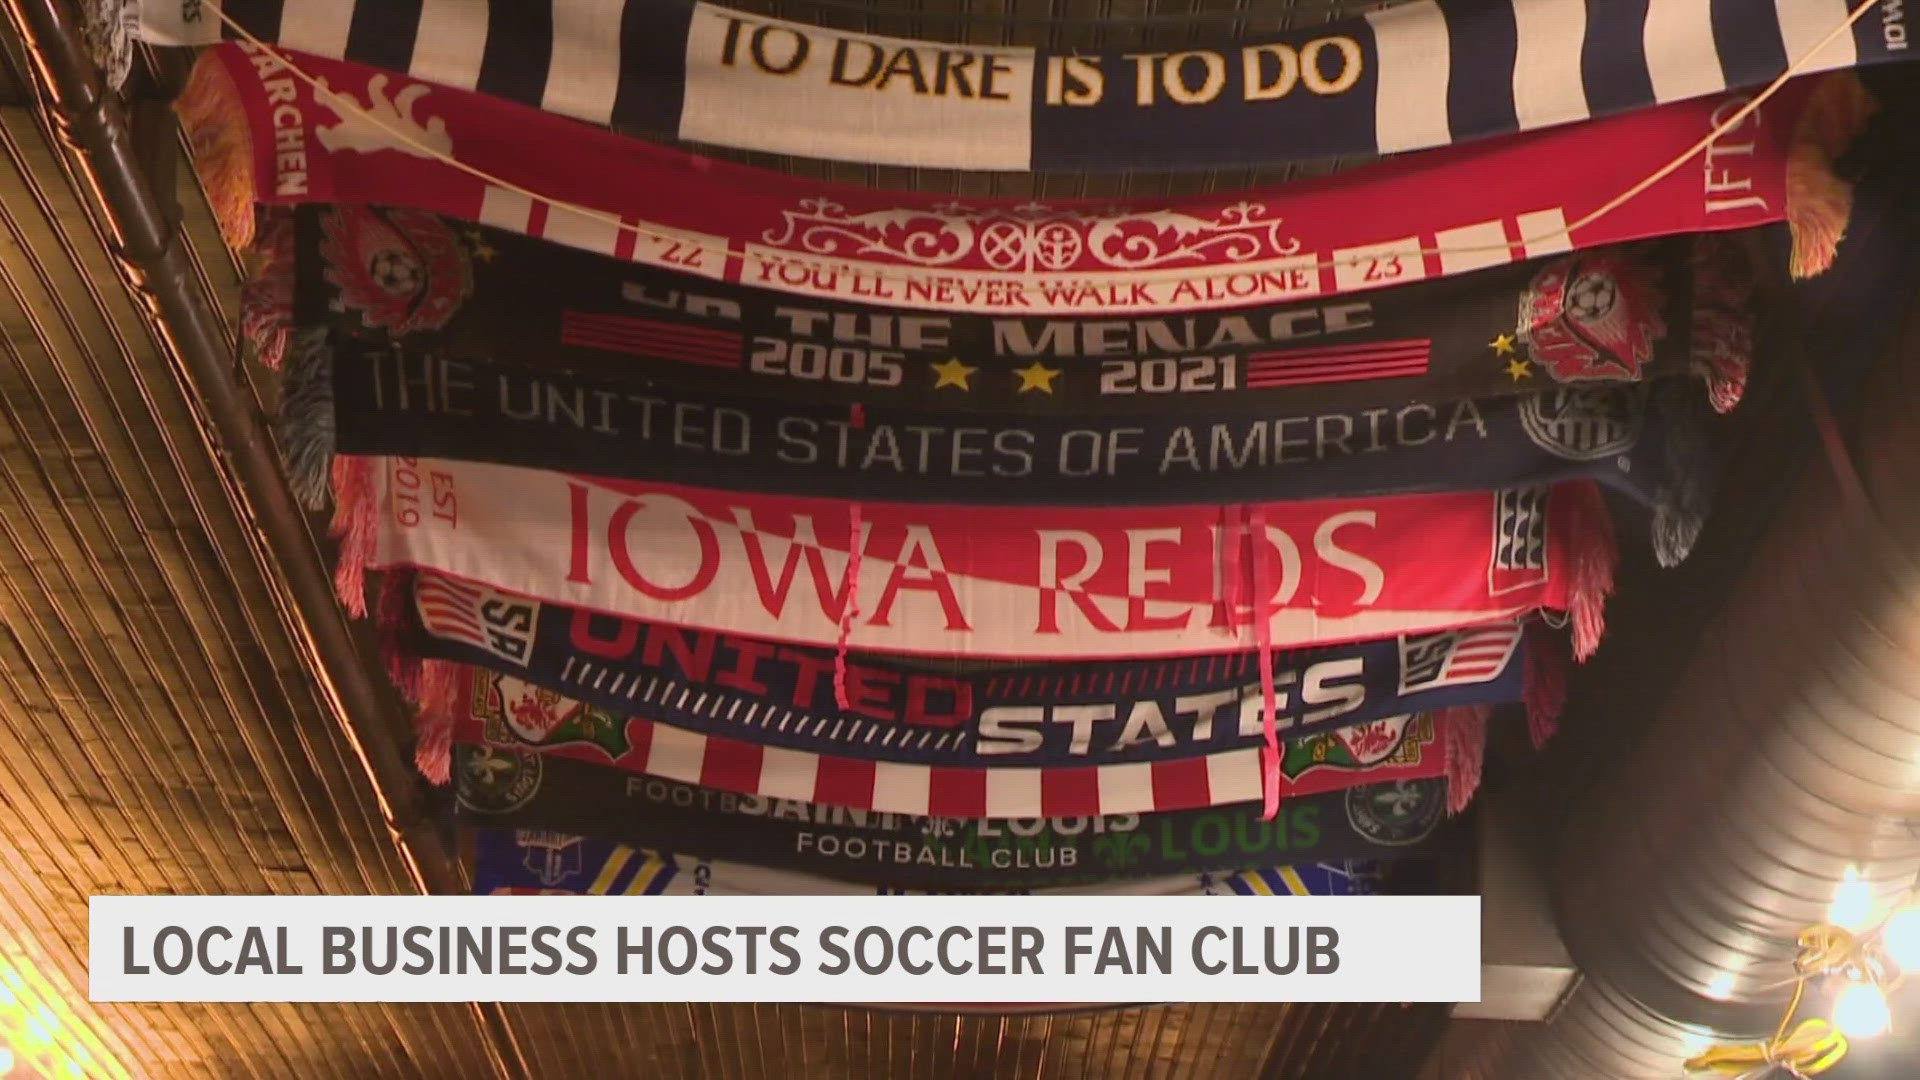 One of the best parts of soccer is the camaraderie both on and off the field. Local 5 Photojournalist Ben Neessen takes viewers to a local pub embracing soccer fans.